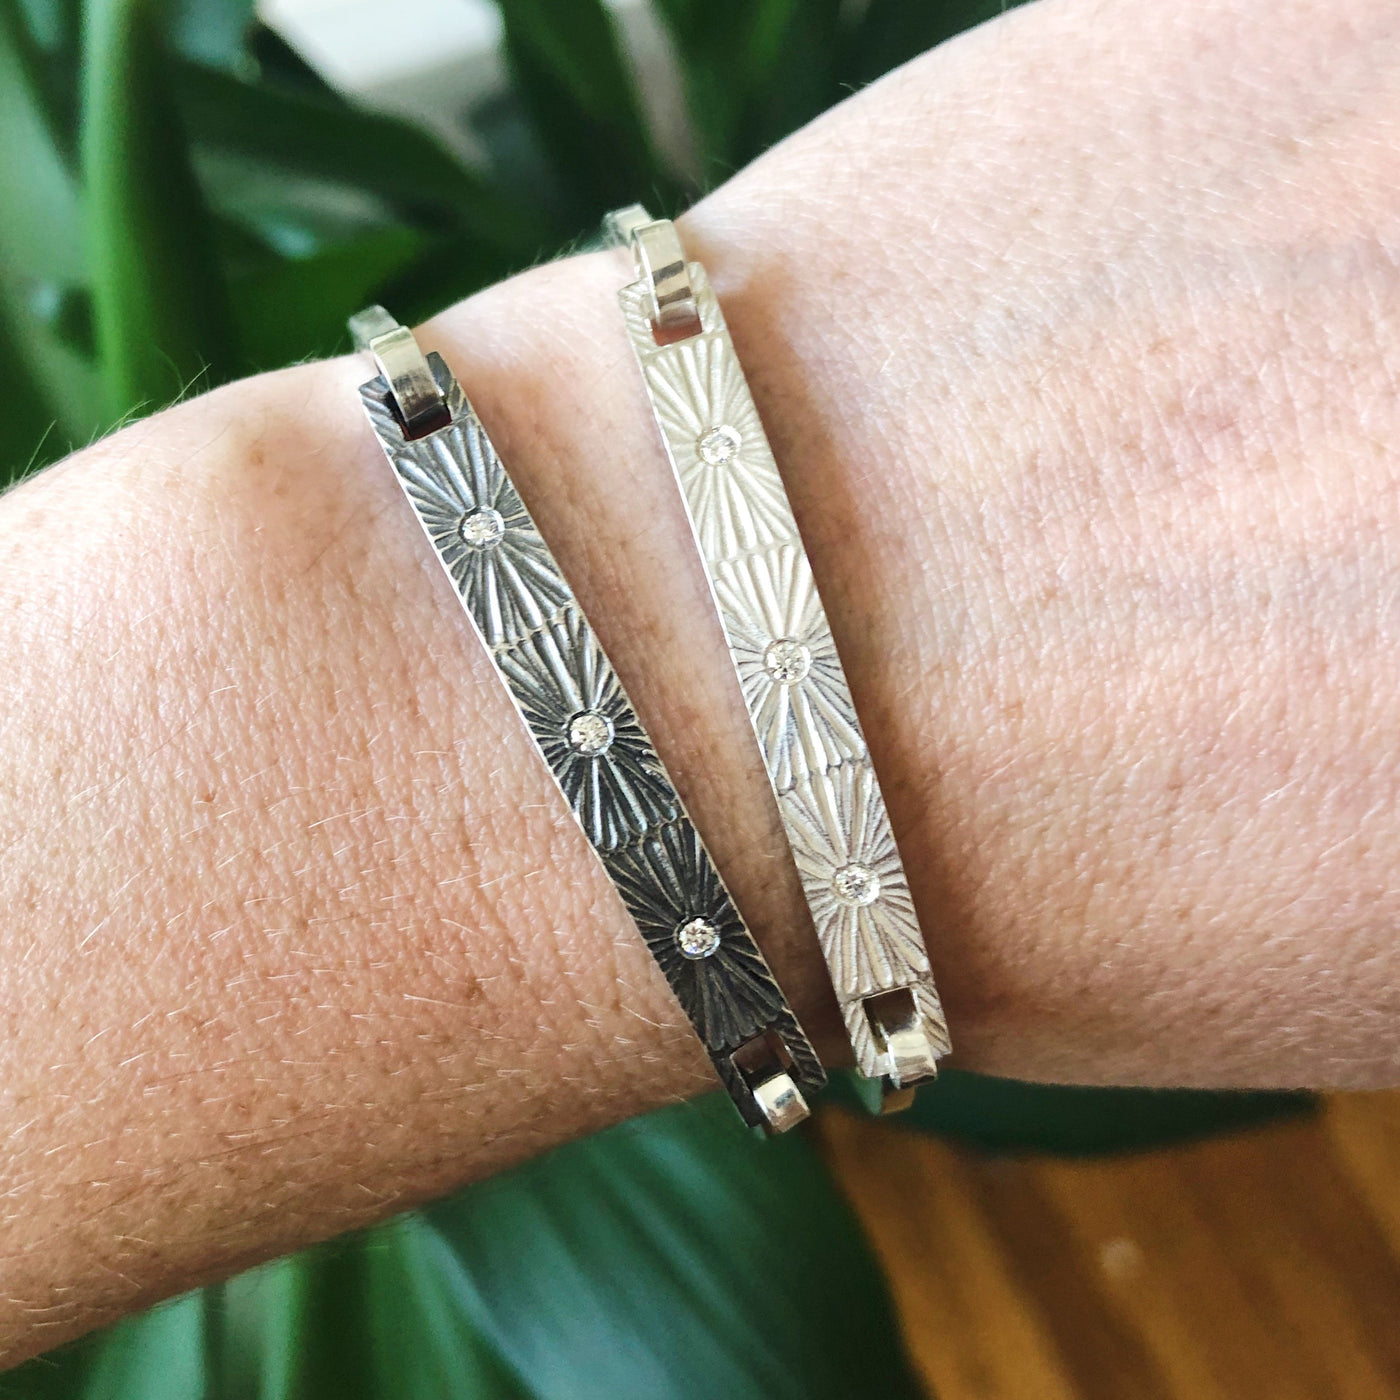 Oxidized sterling silver and bright sterling silver bar bracelet with three diamonds and a carved sunburst around each on a wrist by Corey Egan 